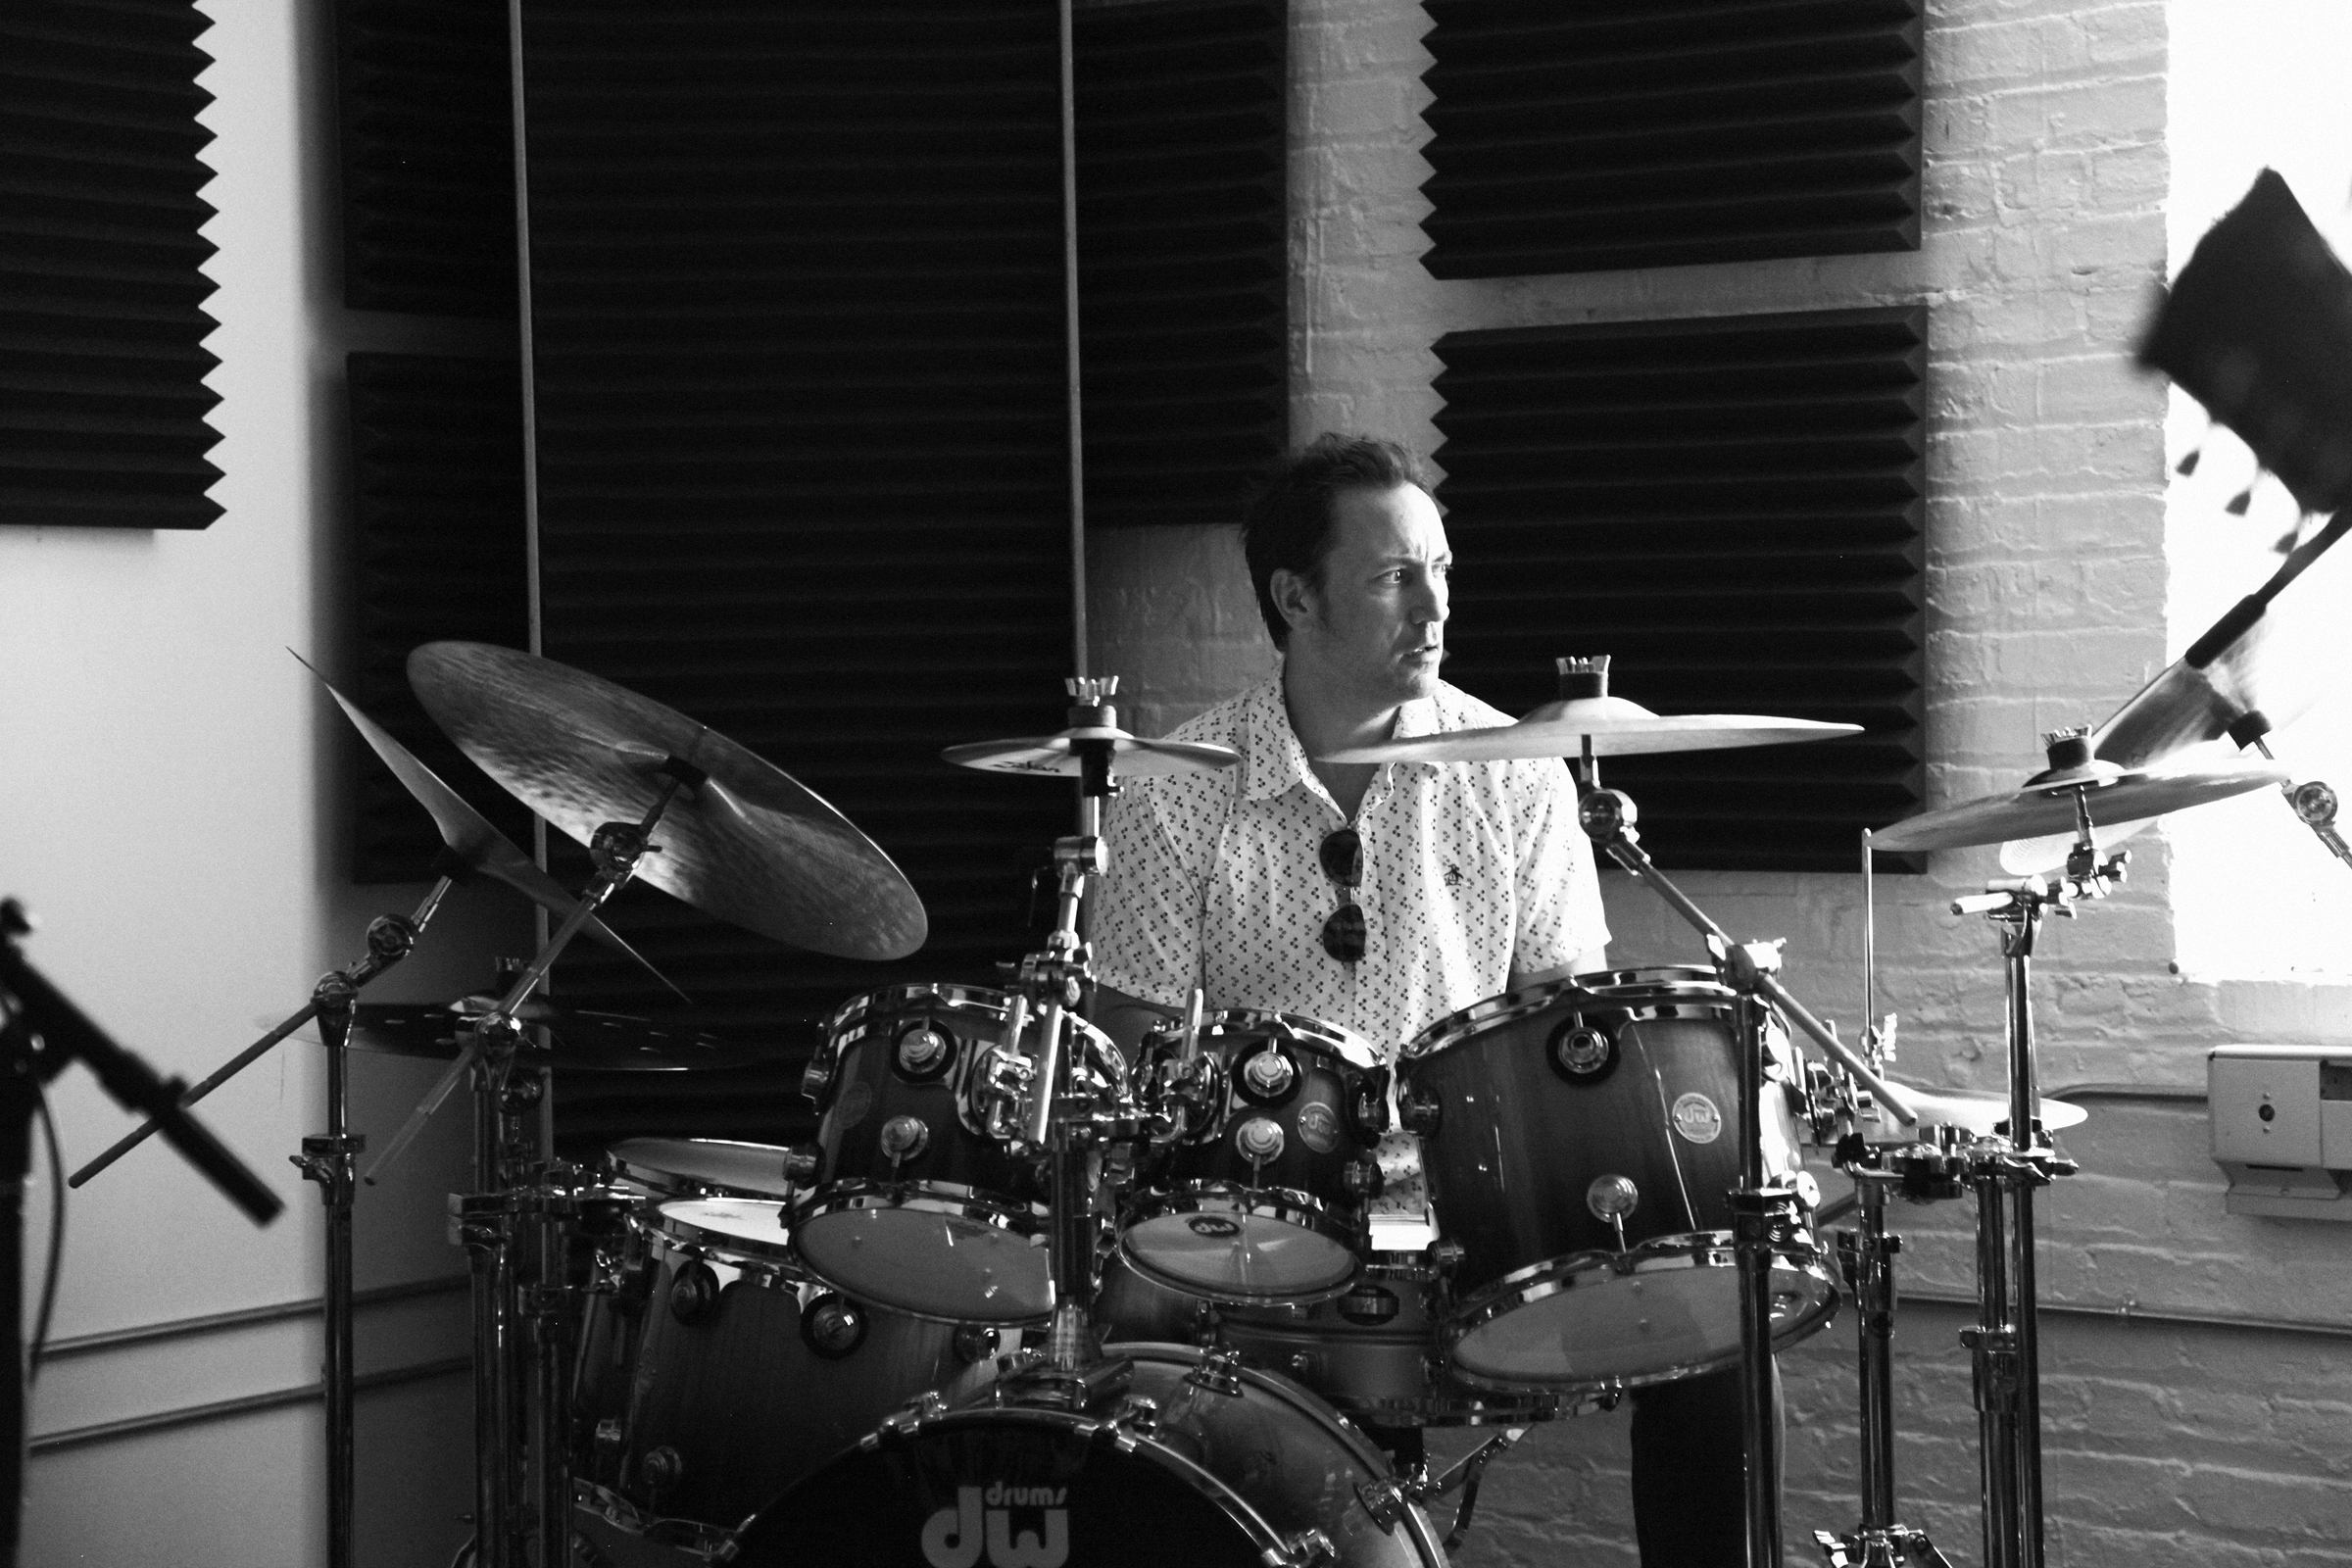 The Jimmy Chamberlin Interview — The Drummer's Journal